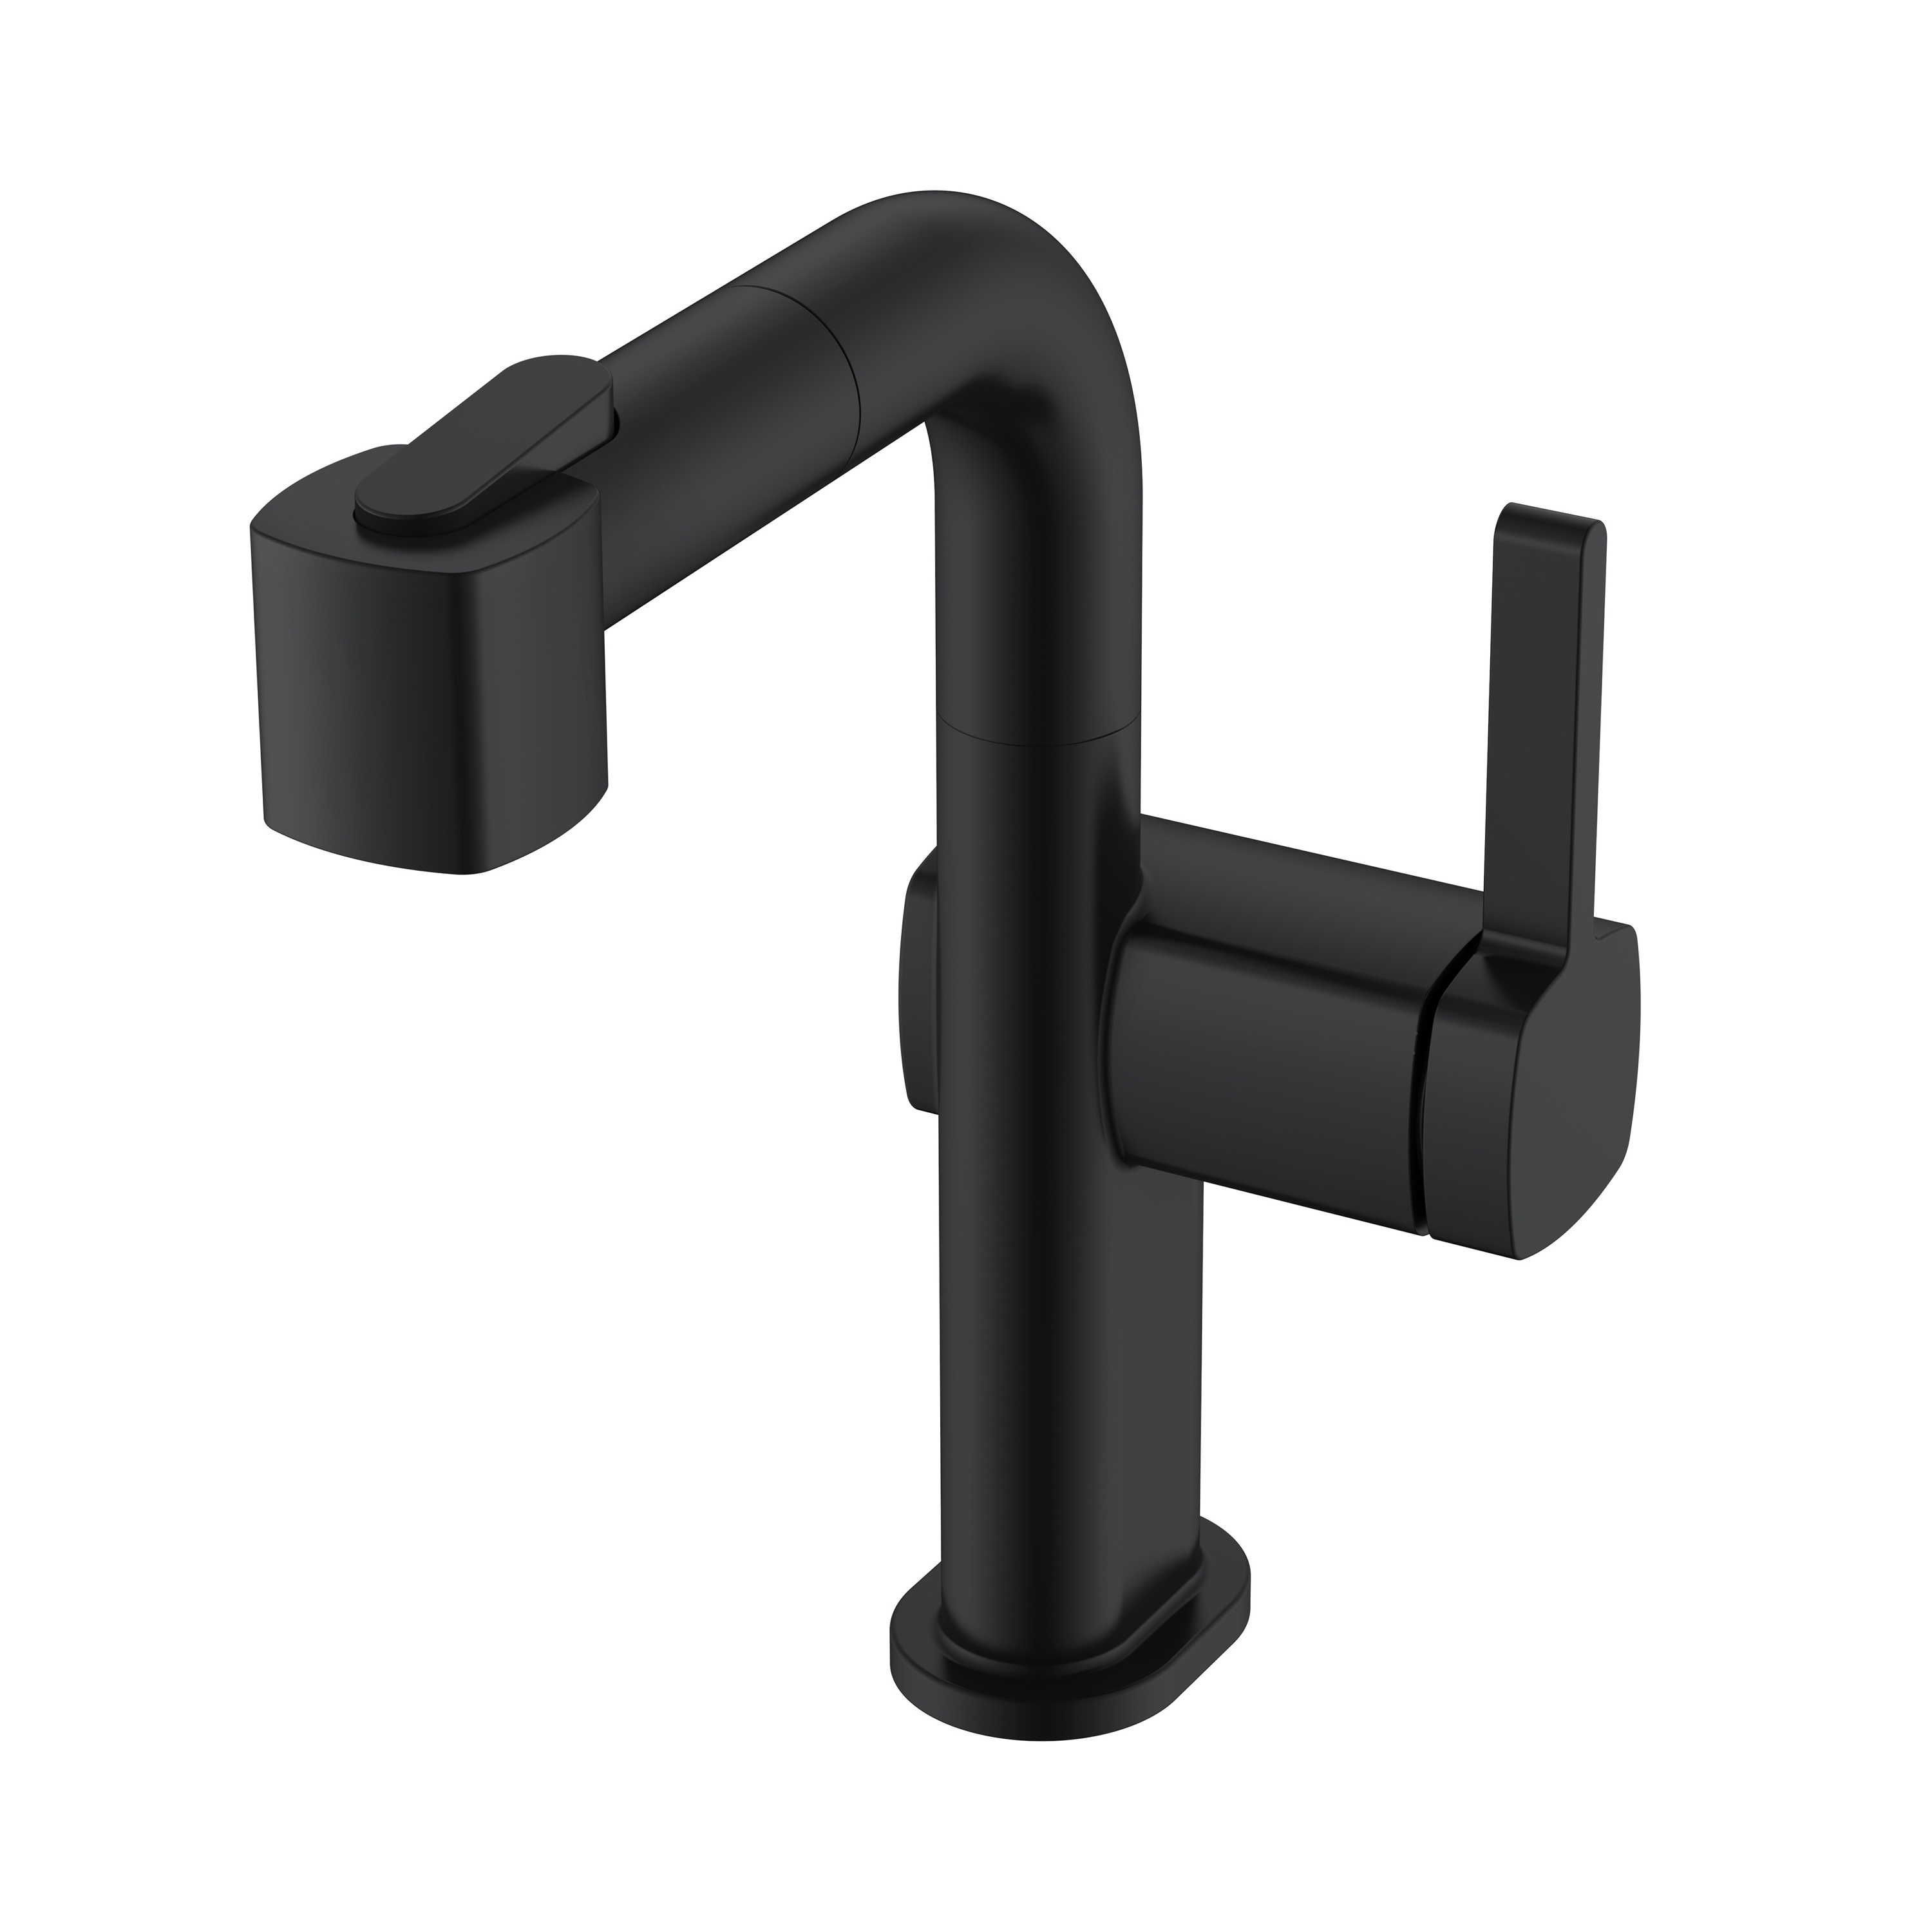 Enhancing Bathroom Aesthetics with Black and Gold Faucets